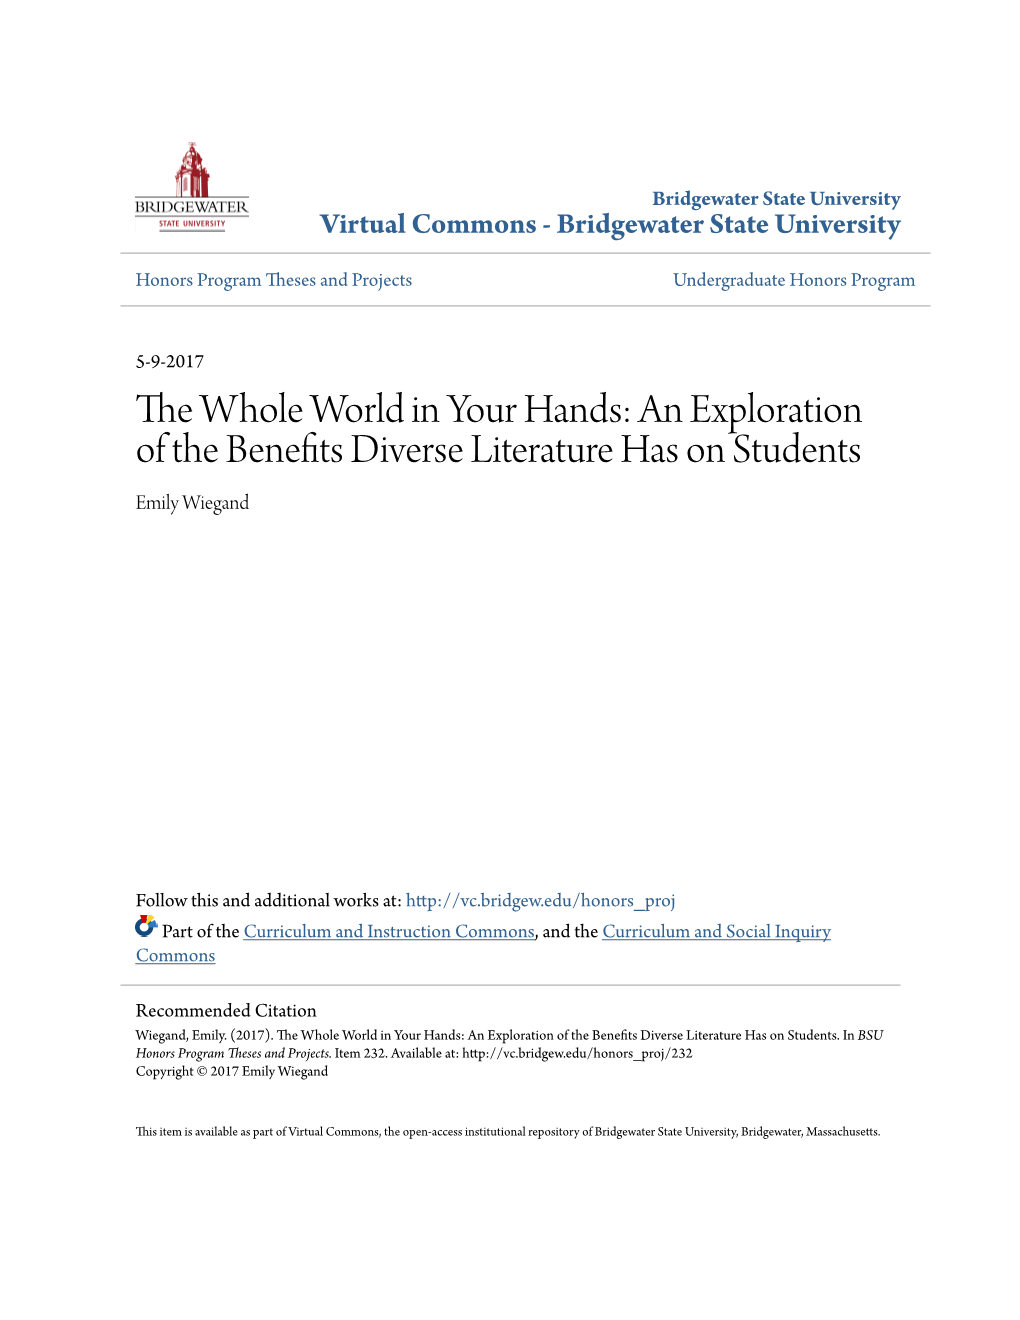 The Whole World in Your Hands: an Exploration of the Benefits Diverse Literature Has on Students Emily Wiegand